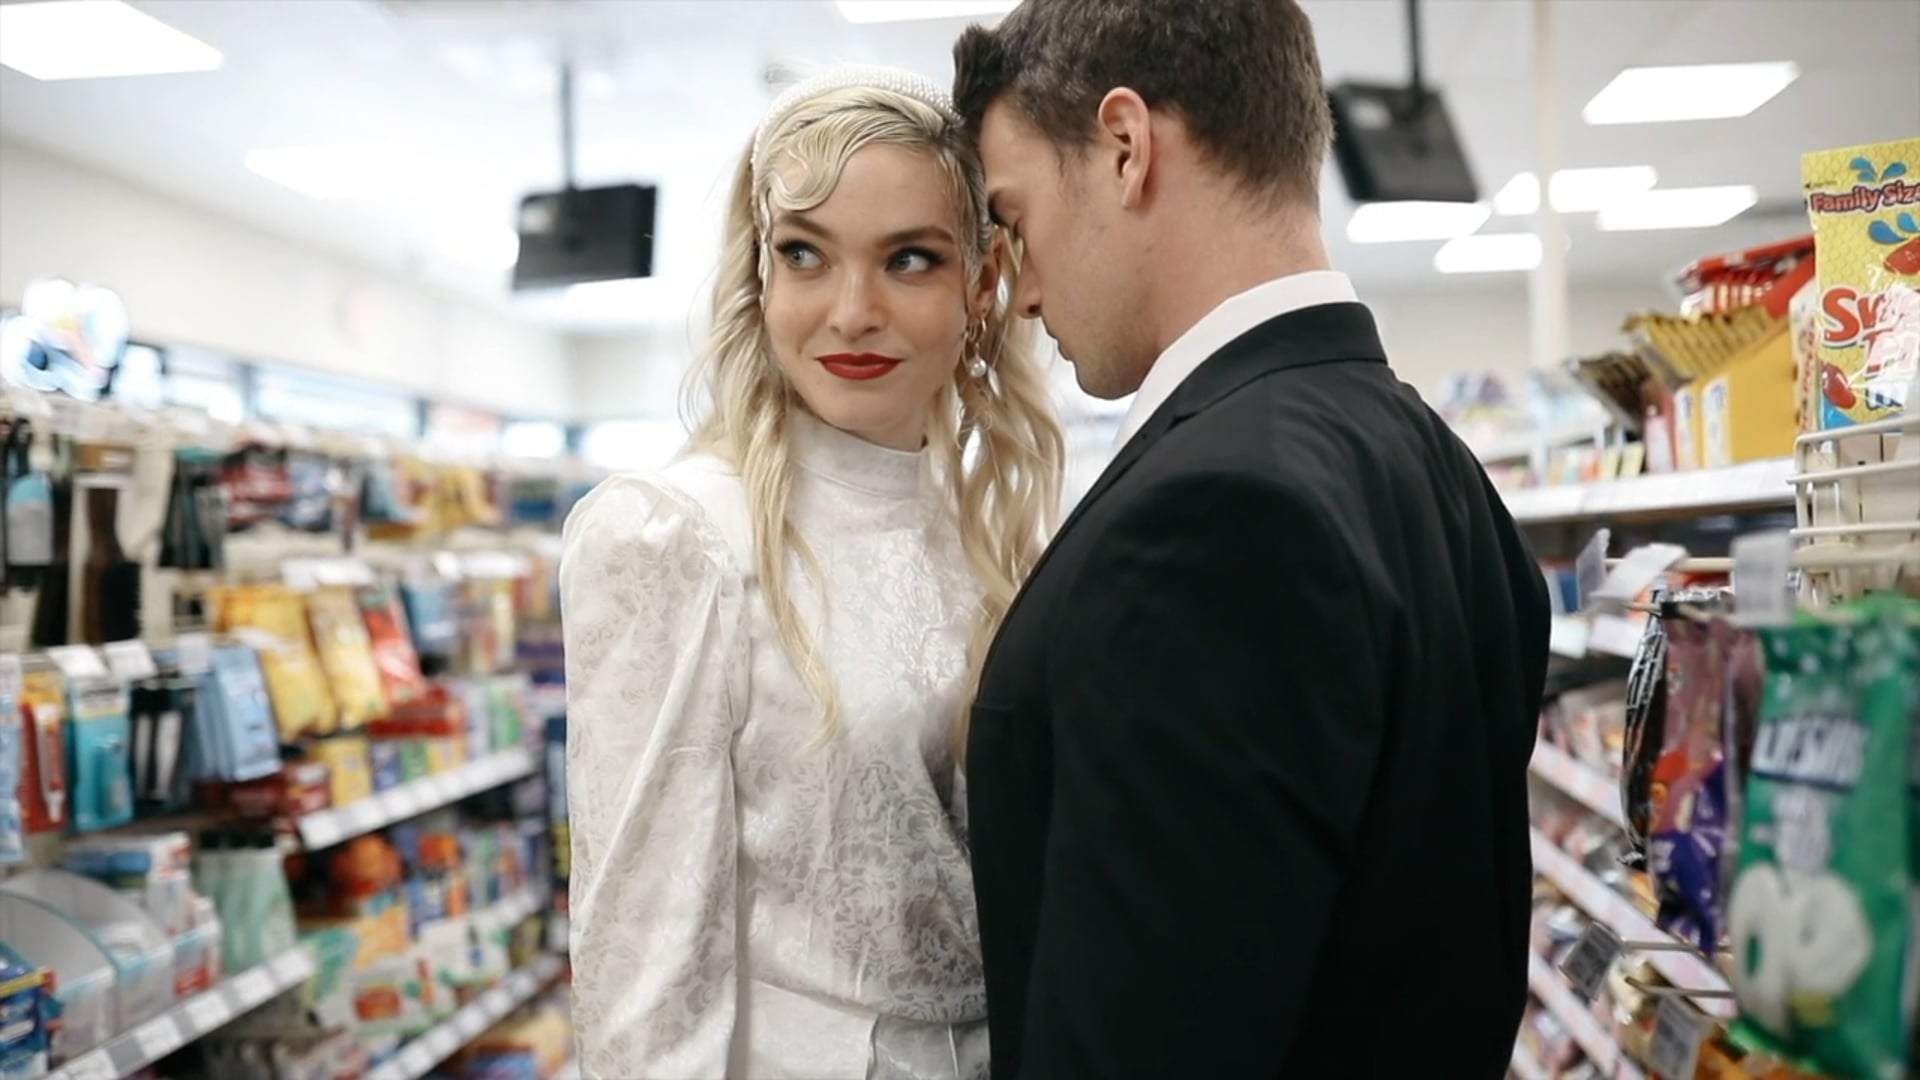 you make it look like it's magic -- gas station elopement.